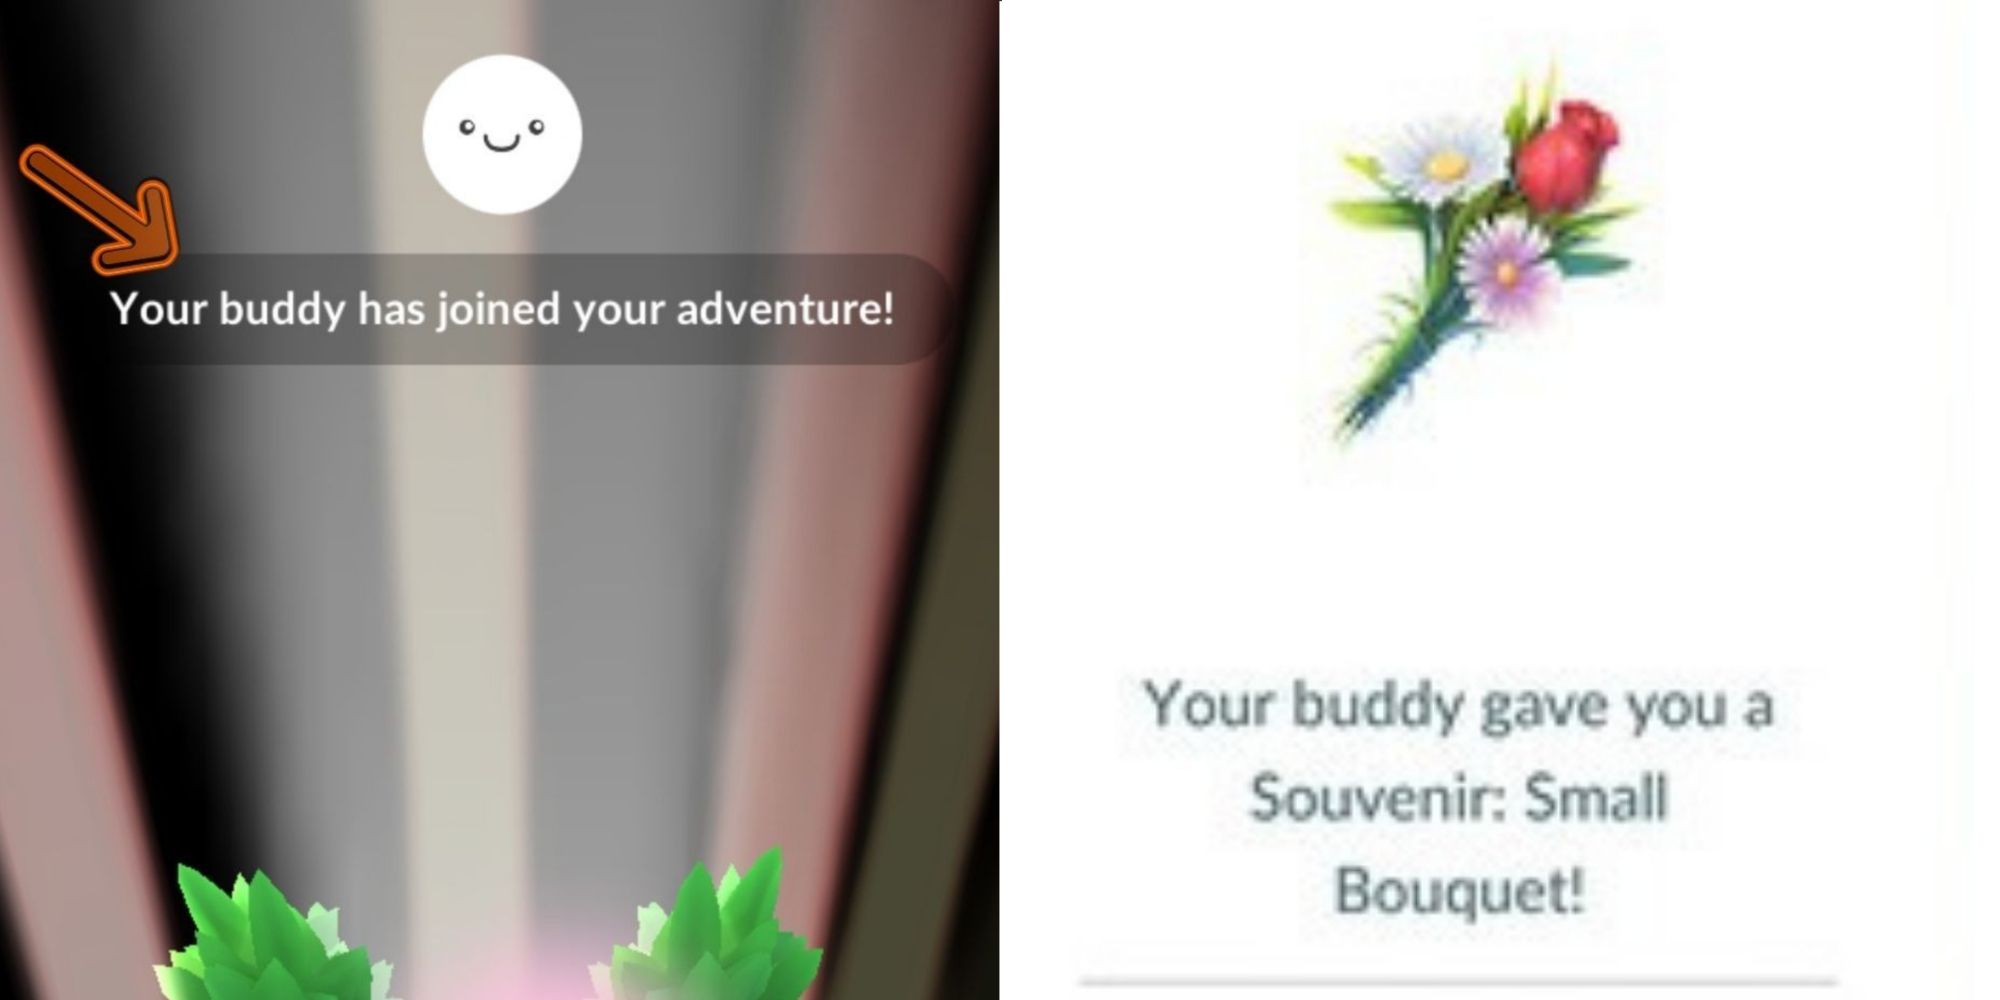 Pokemon Go screenshots showing a Pokemon has joined your adventure and given the player a souvenir bouquet